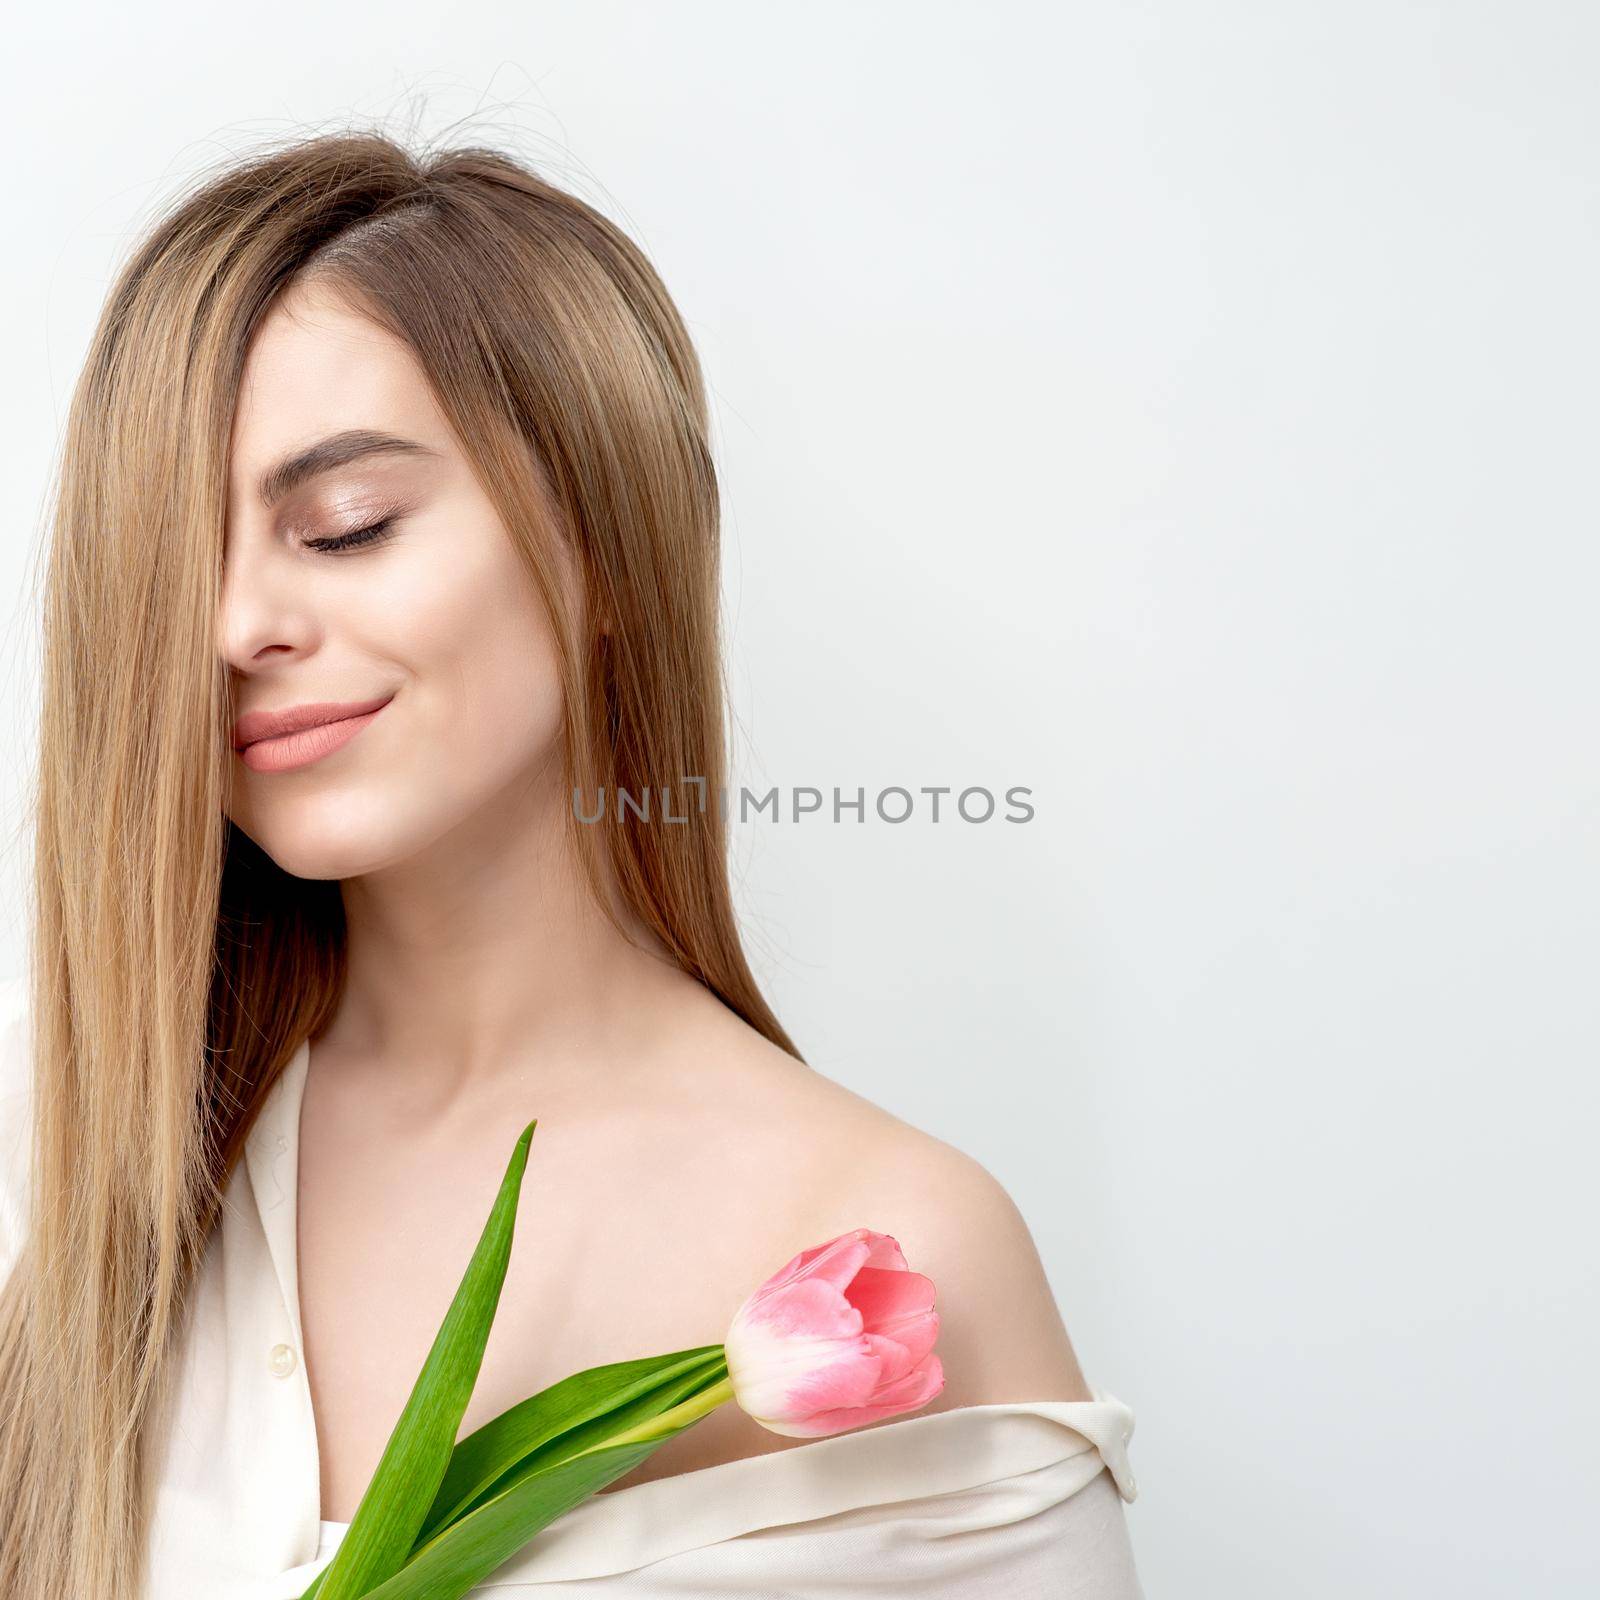 A portrait of a happy young caucasian woman with closed eyes and one pink tulip against a white background with copy space